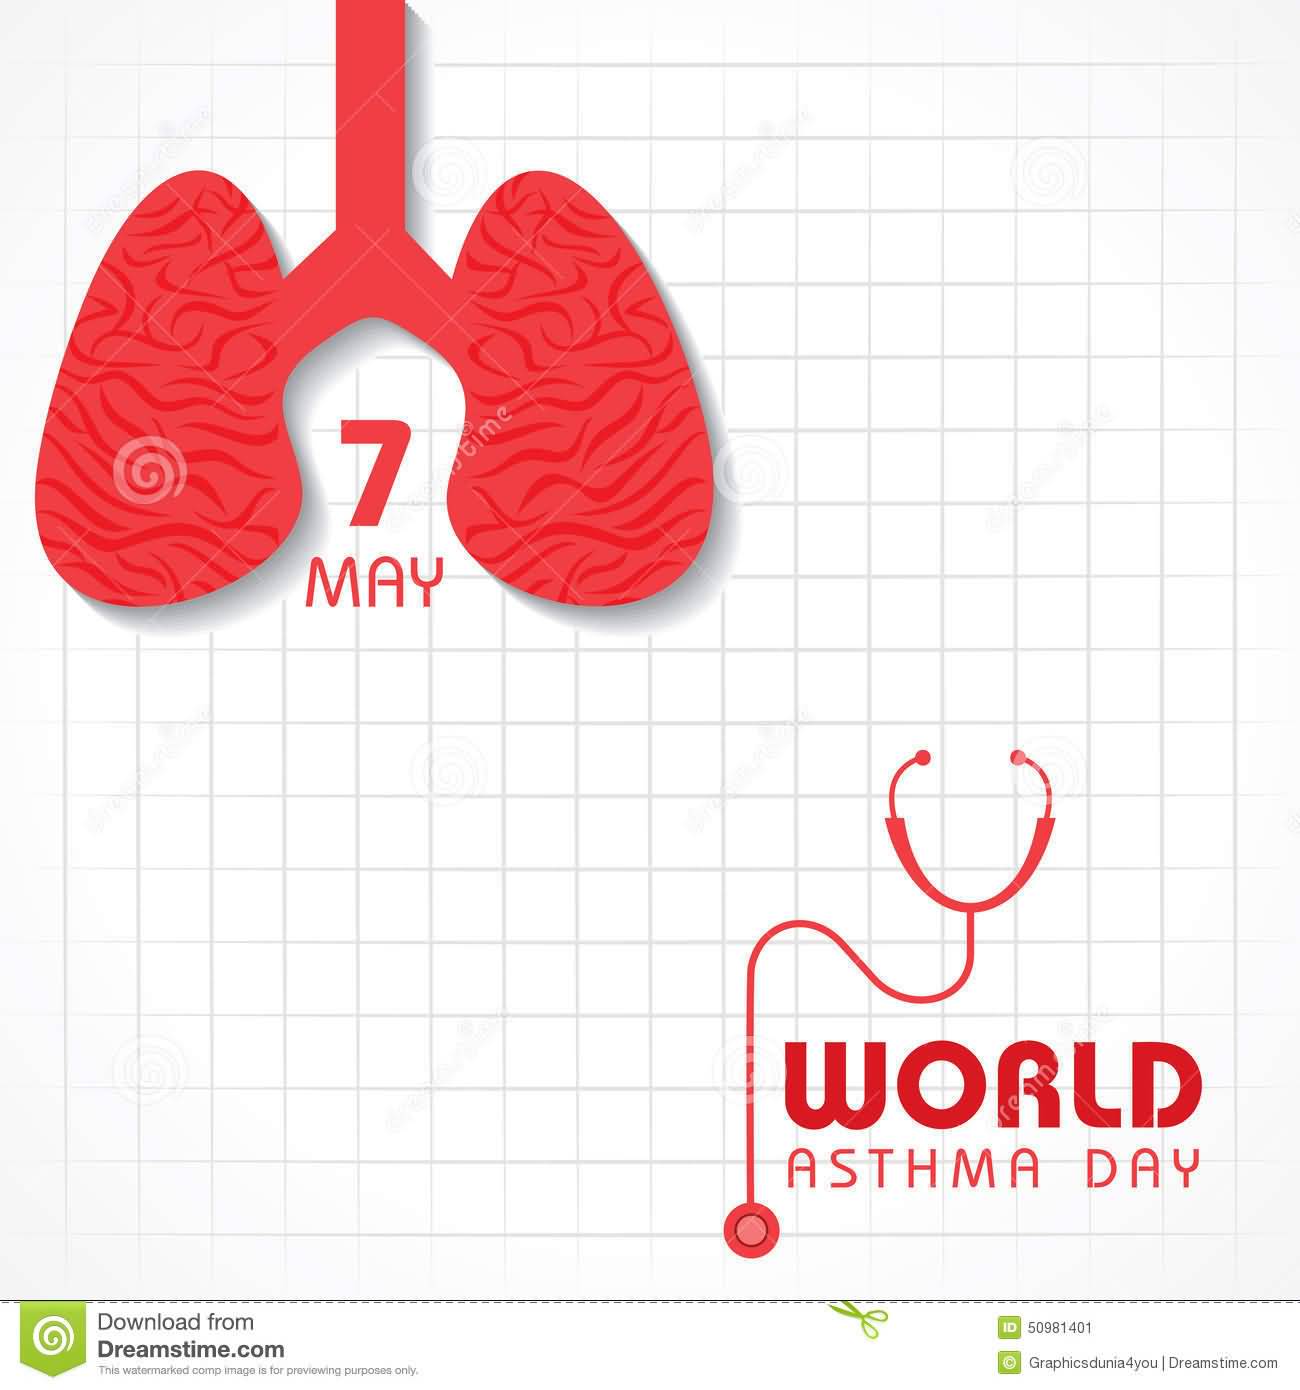 7 May World Asthma Day Lungs Illustration